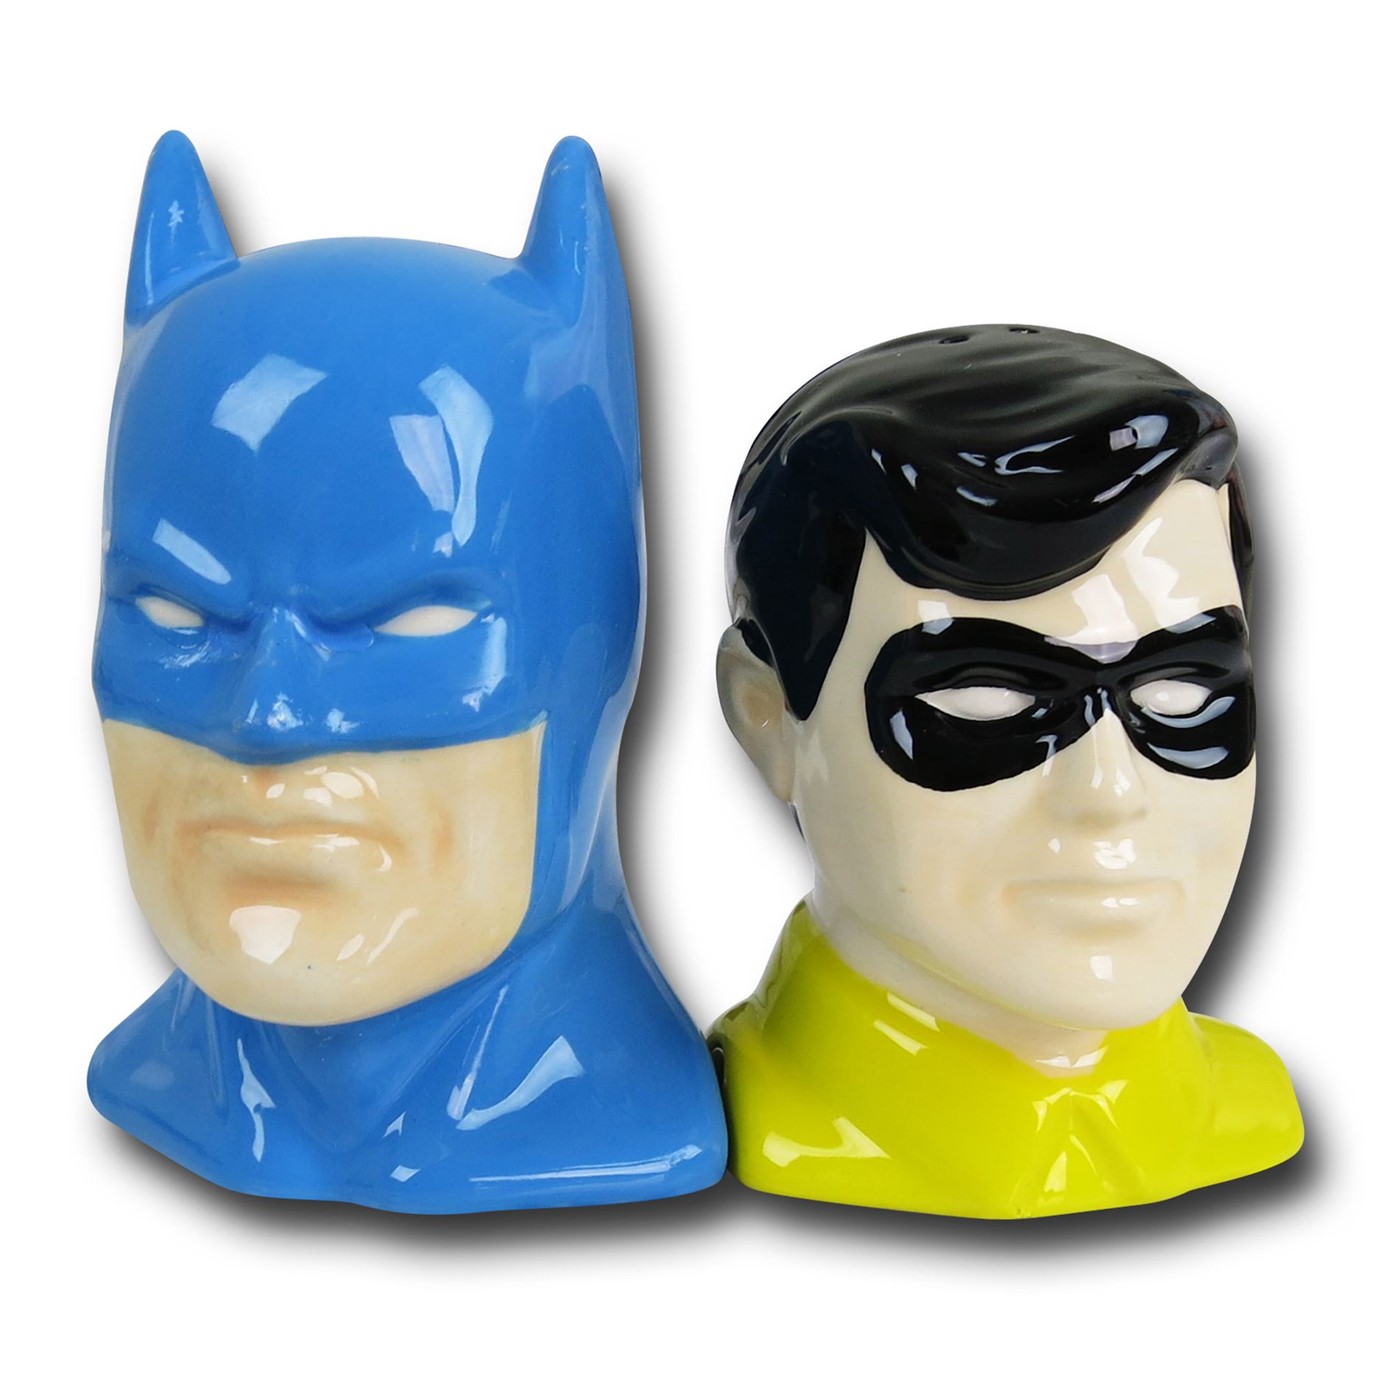 Batman and Robin Busts Salt and Pepper Shakers